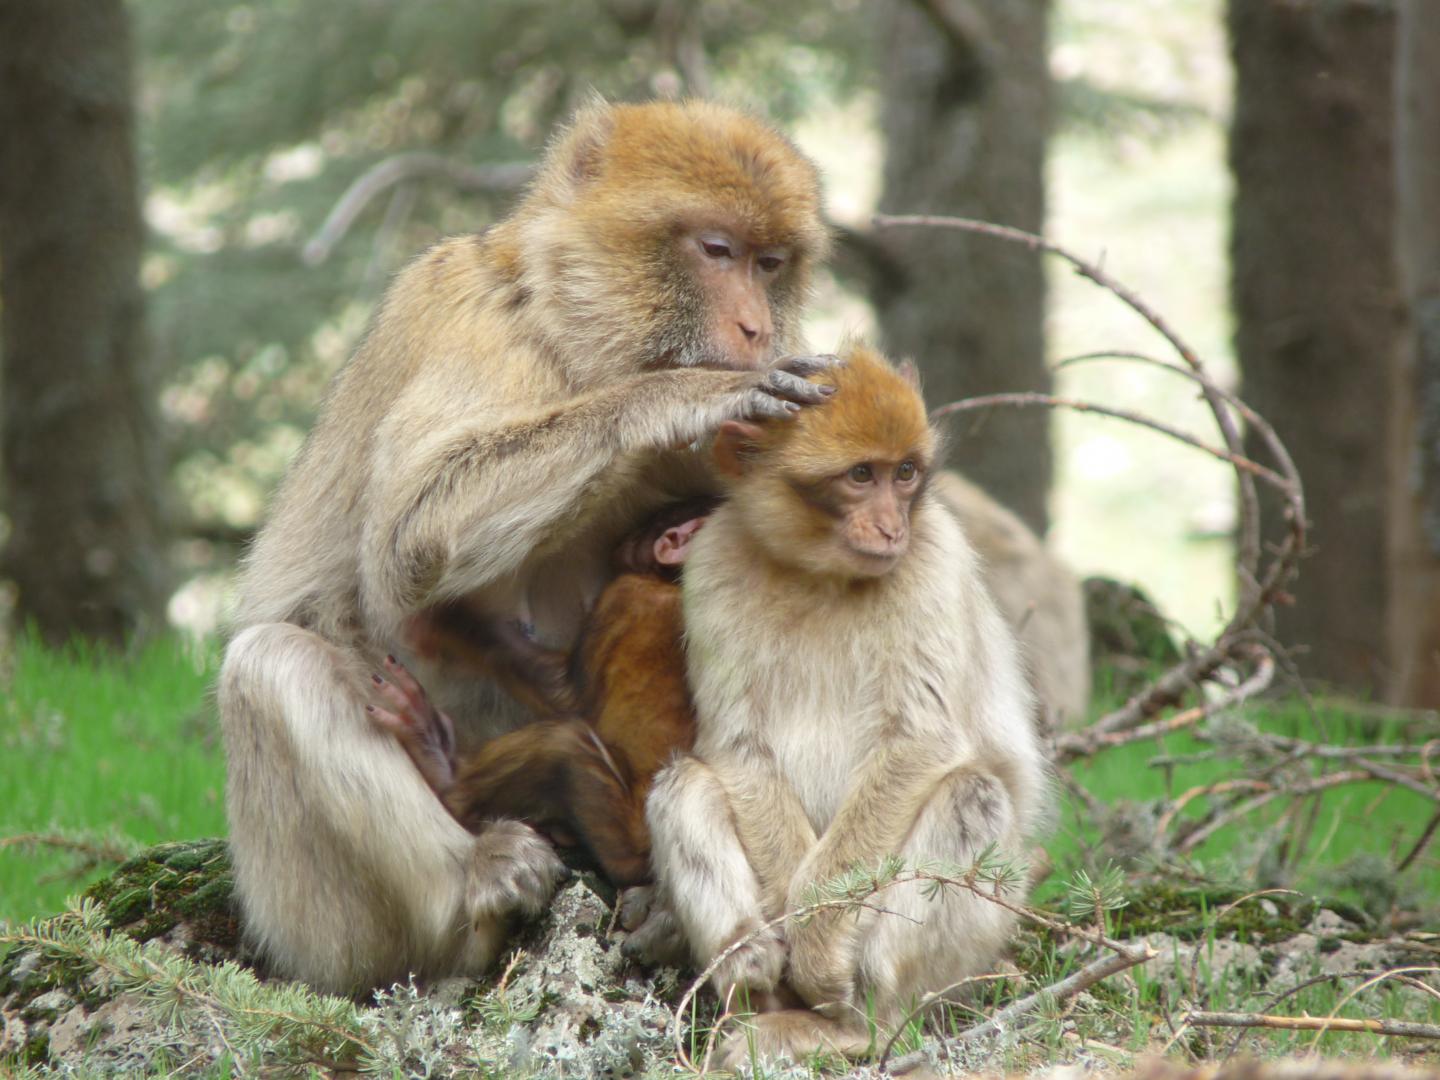 Barbary Macaques in the Wild